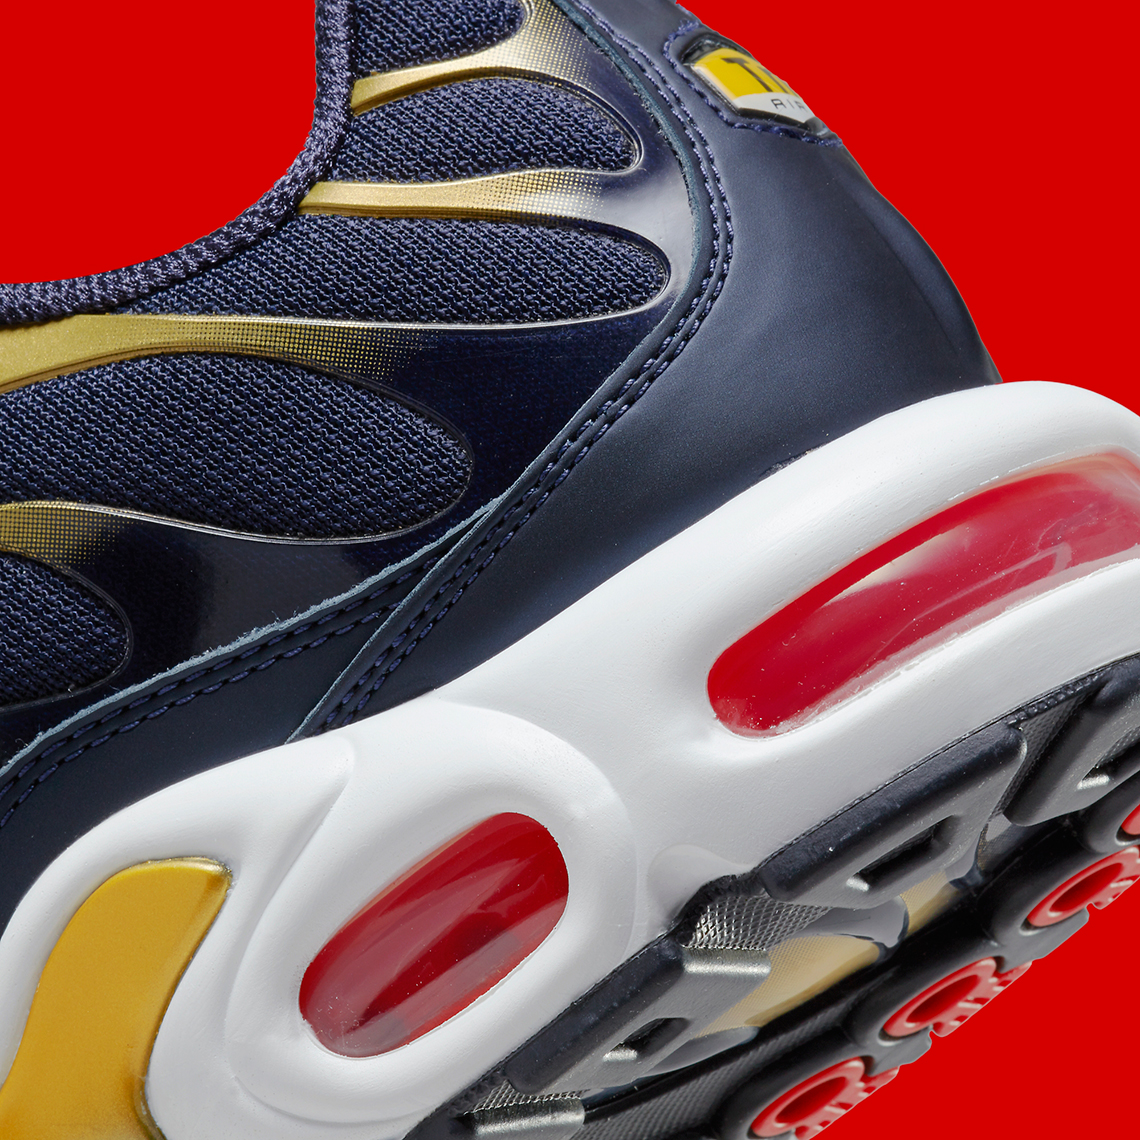 Nike Air Max Plus Olympic Dh4682 400 Release Date 5